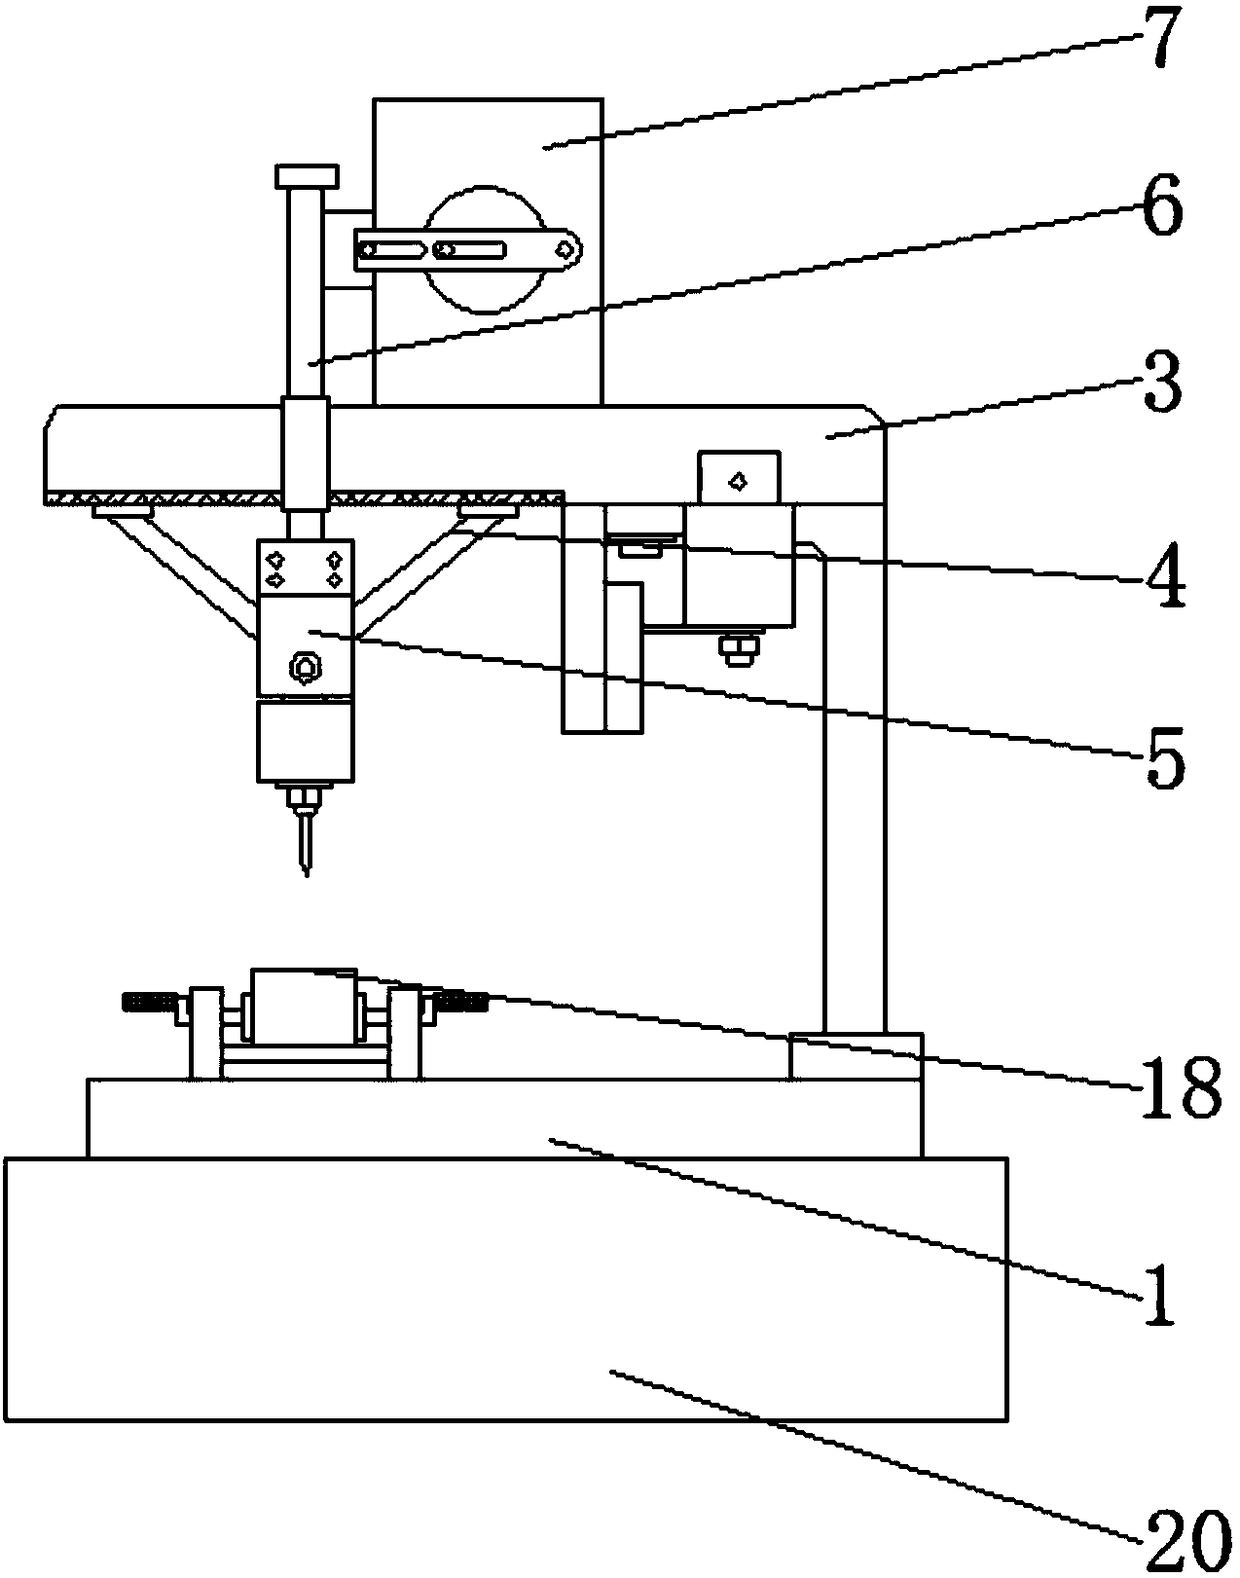 Application method of drilling machine for hardware precise part machining